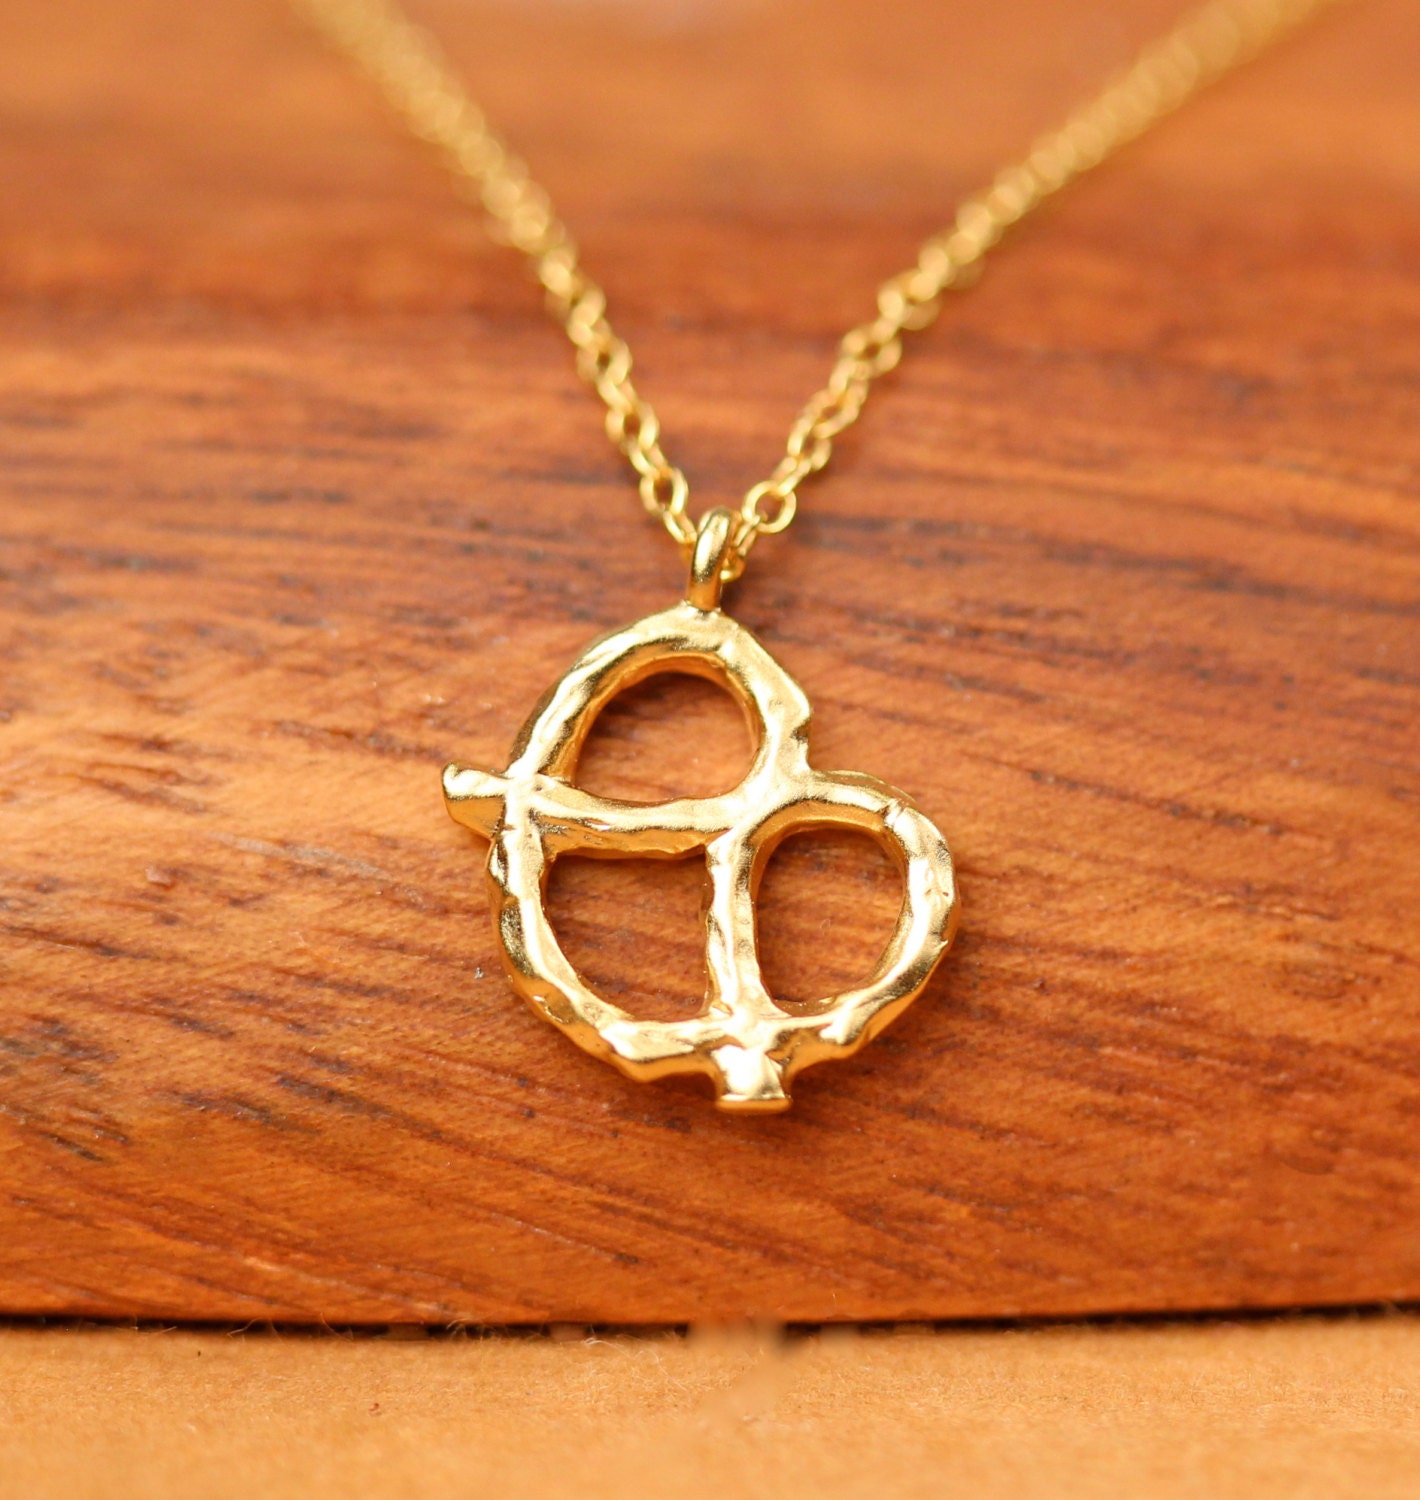 Pretzel necklace, bff necklace, kawaii necklace, the perfect gift ...